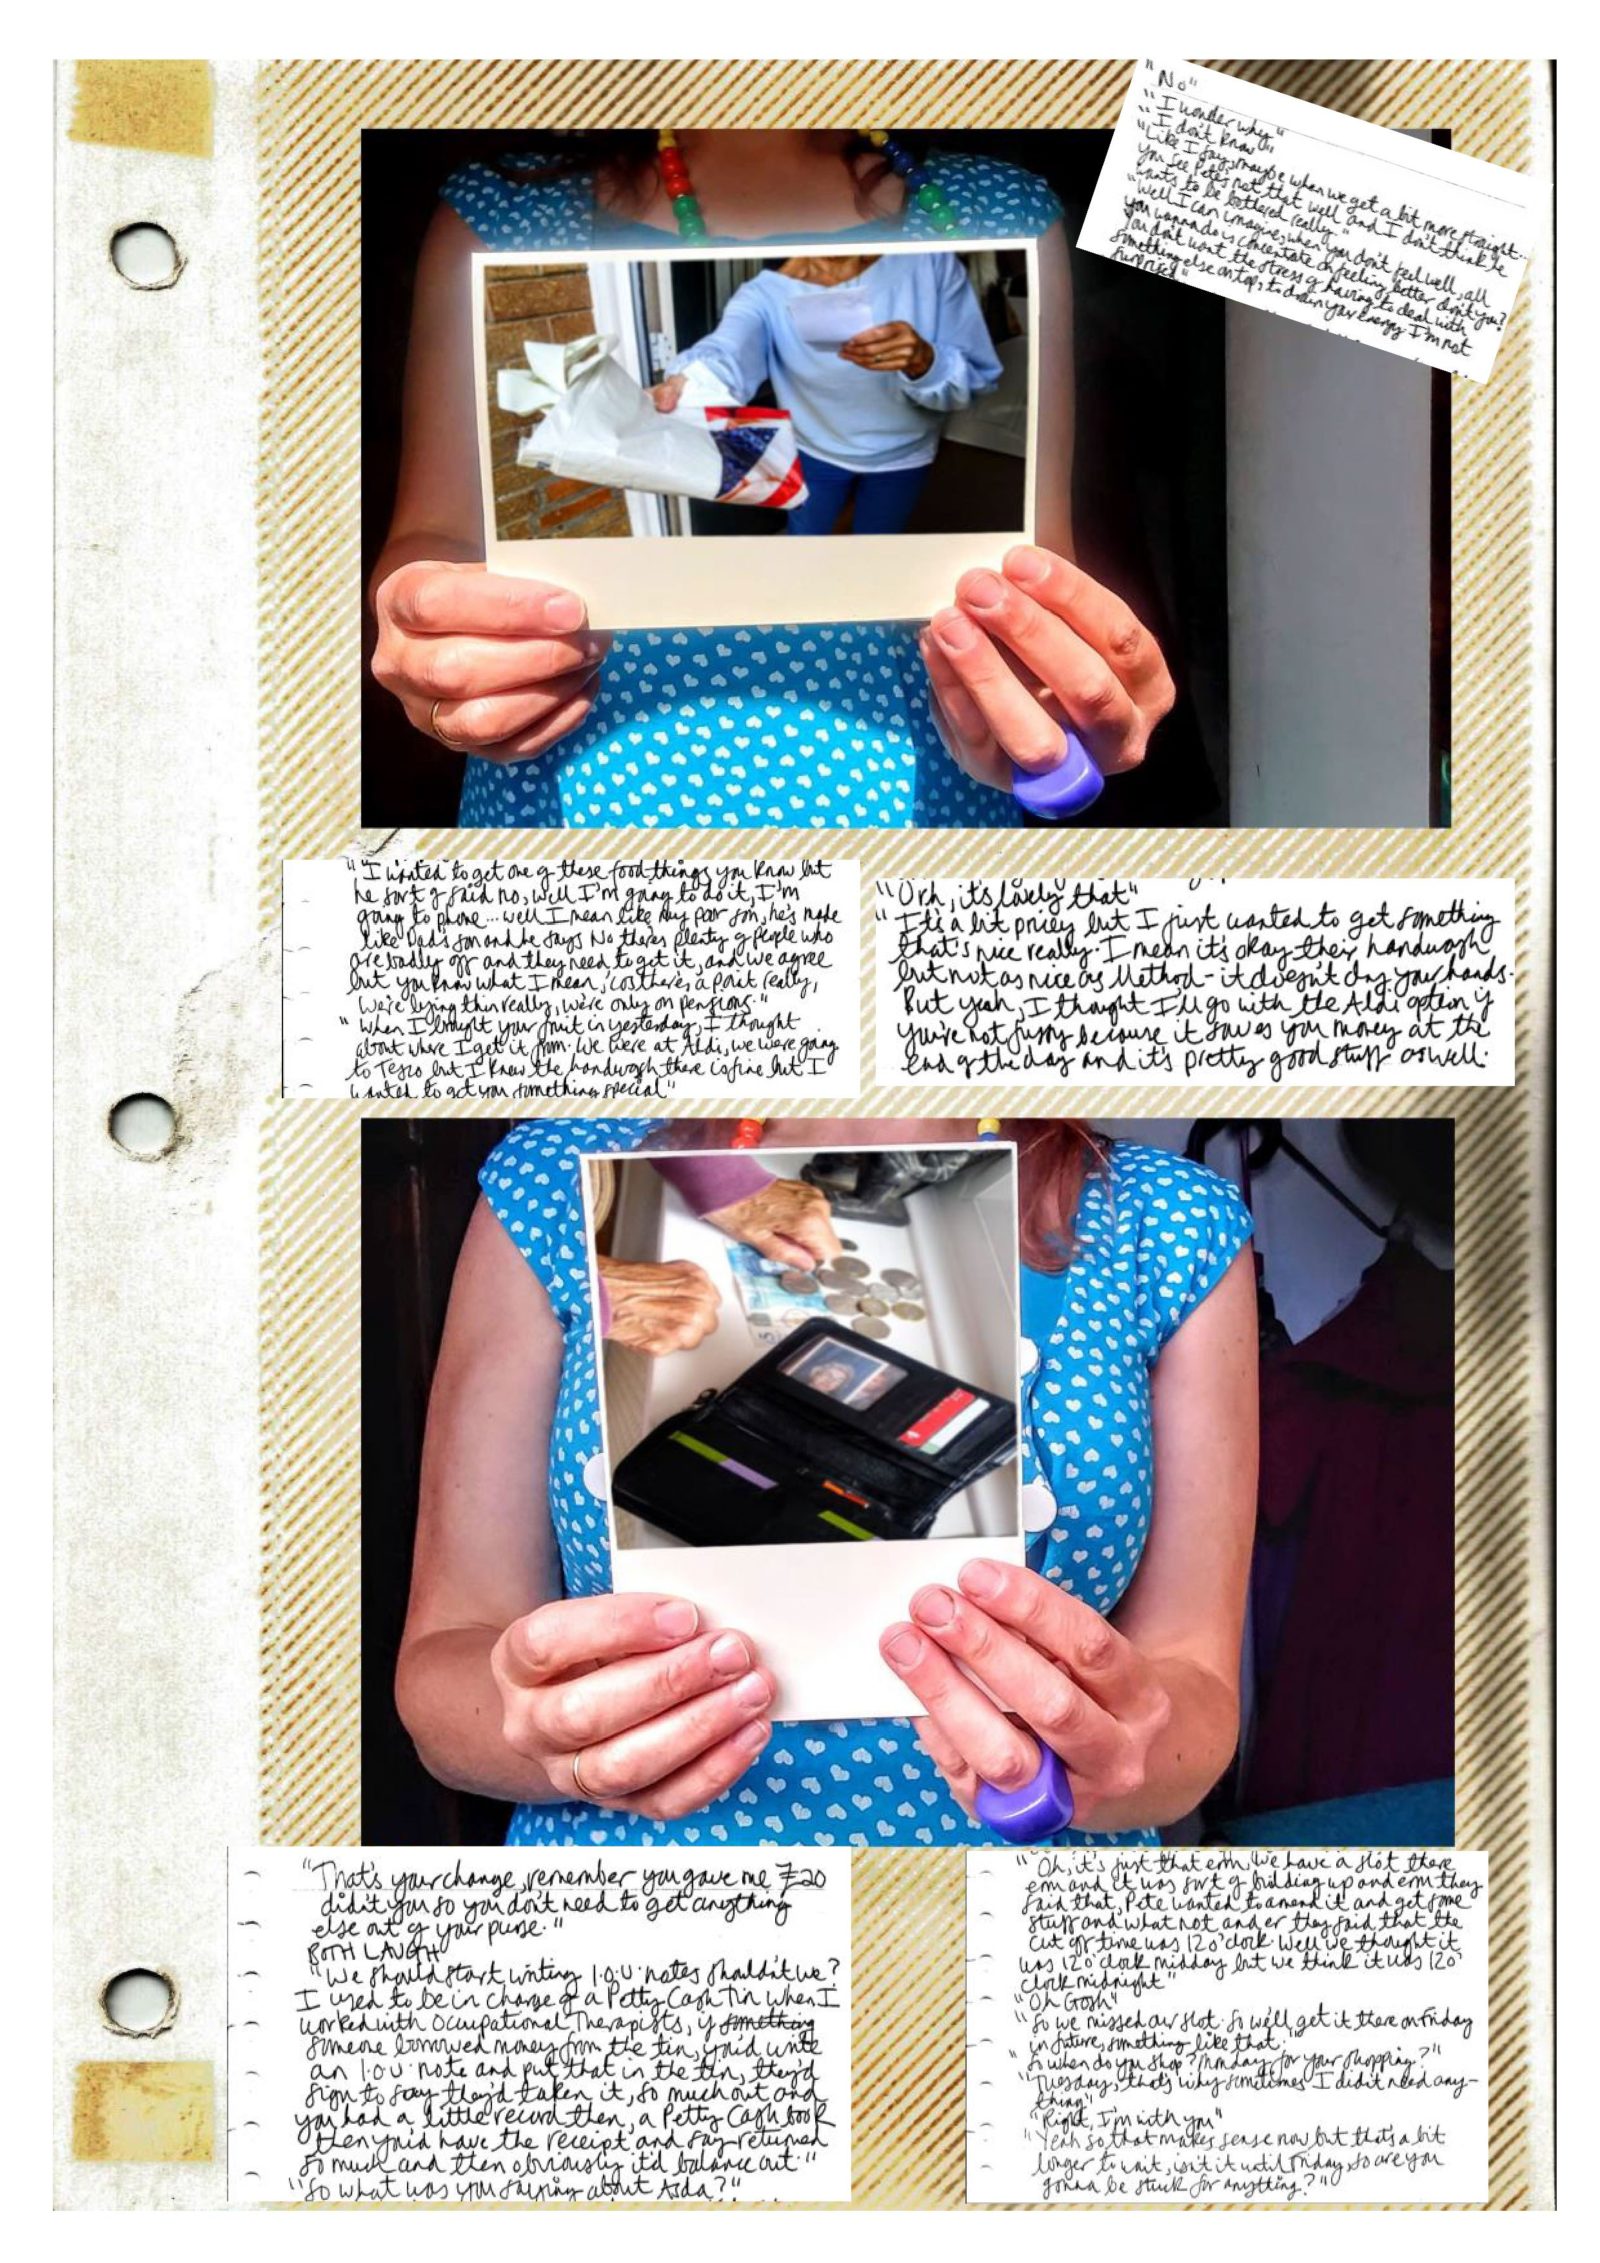 Two hands are clasped around a photograph of a person holding out an empty, folded shopping bag and another of a purse and cash on a shop counter. The hands belong to someone in a bright blue dress. Around the images are handwritten messages.